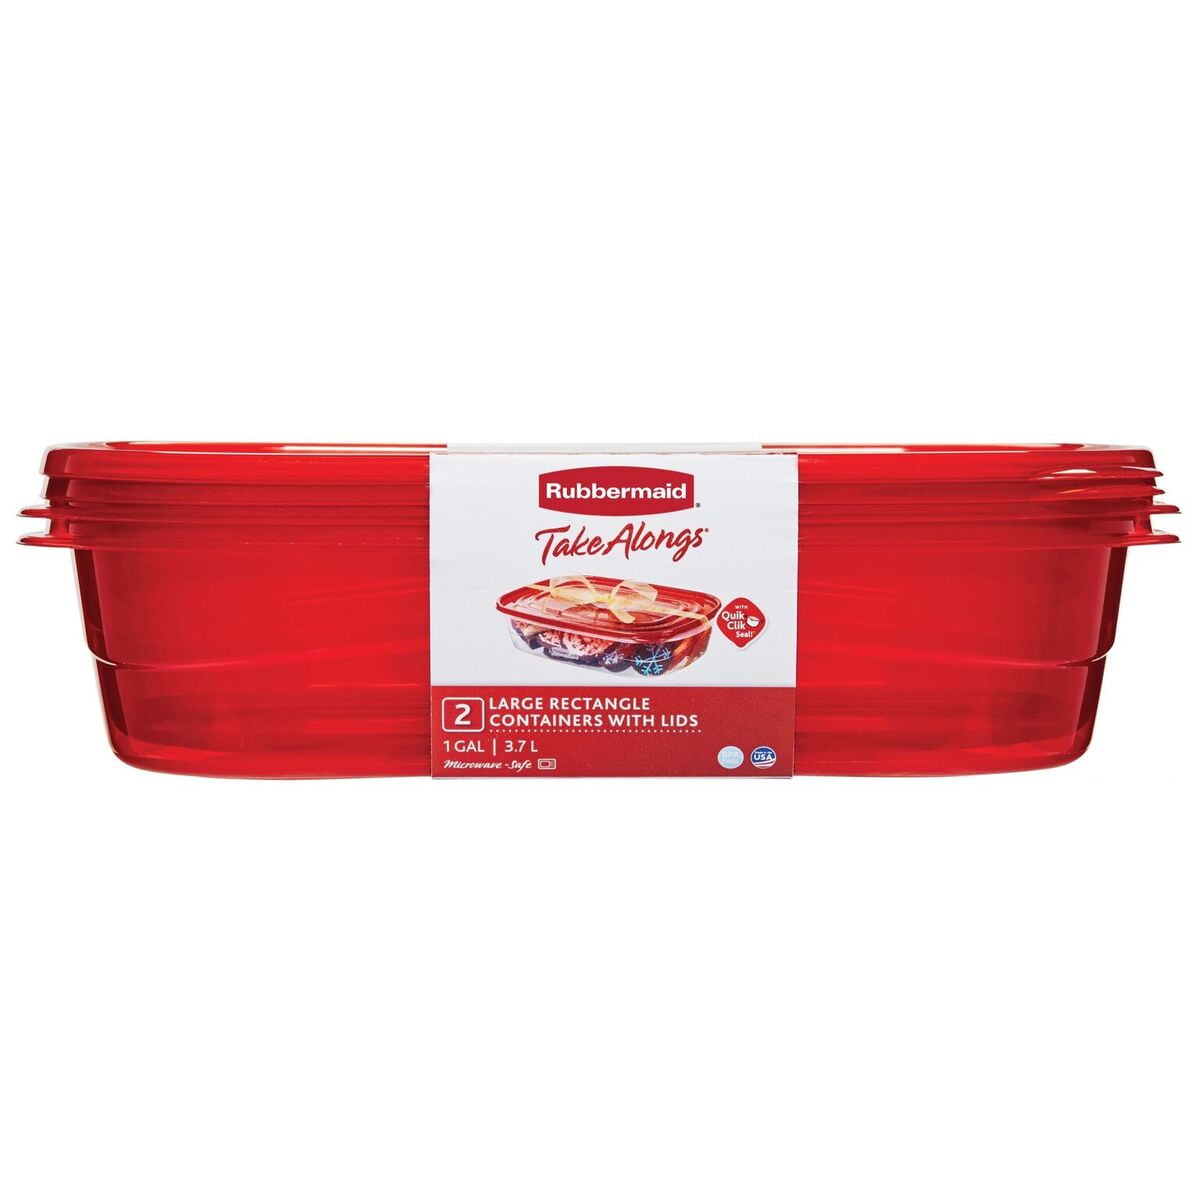  Rubbermaid TakeAlongs Large Rectangular Food Storage  Containers, 1 Gallon, Tint Chili, 2 Count : Home & Kitchen